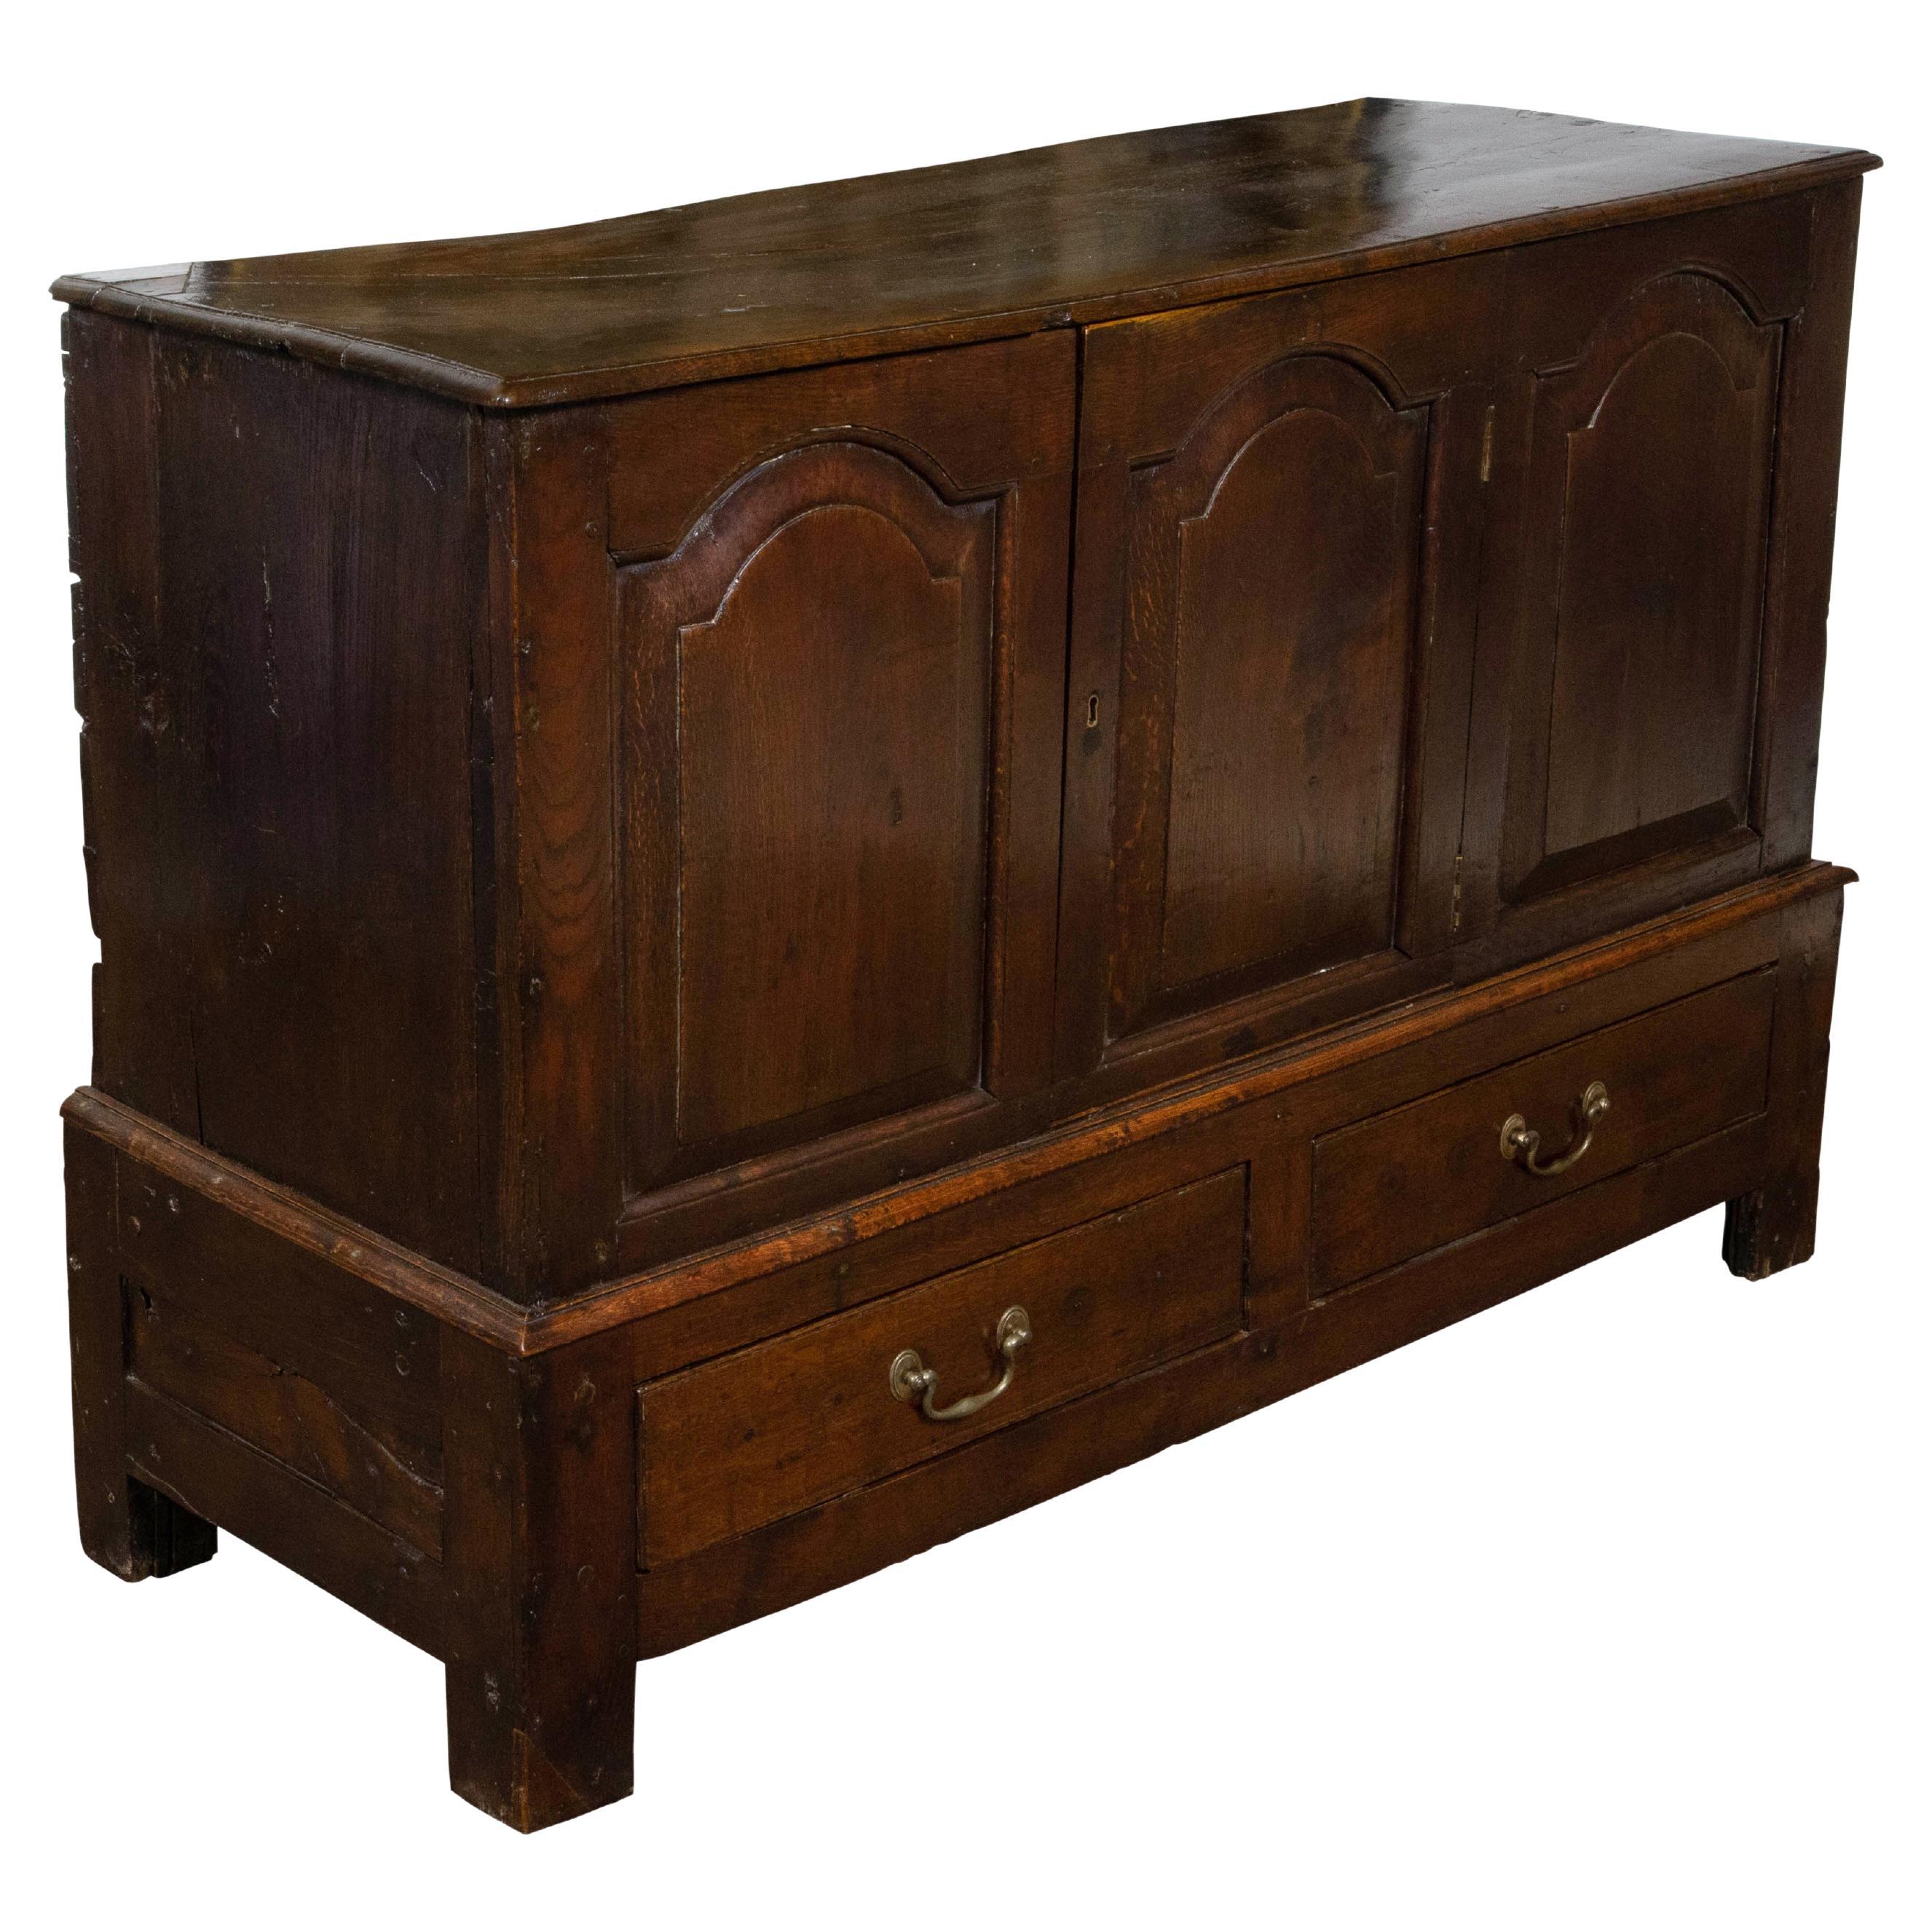 English Georgian Period 18th Century Oak Buffet with Carved Arching Doors